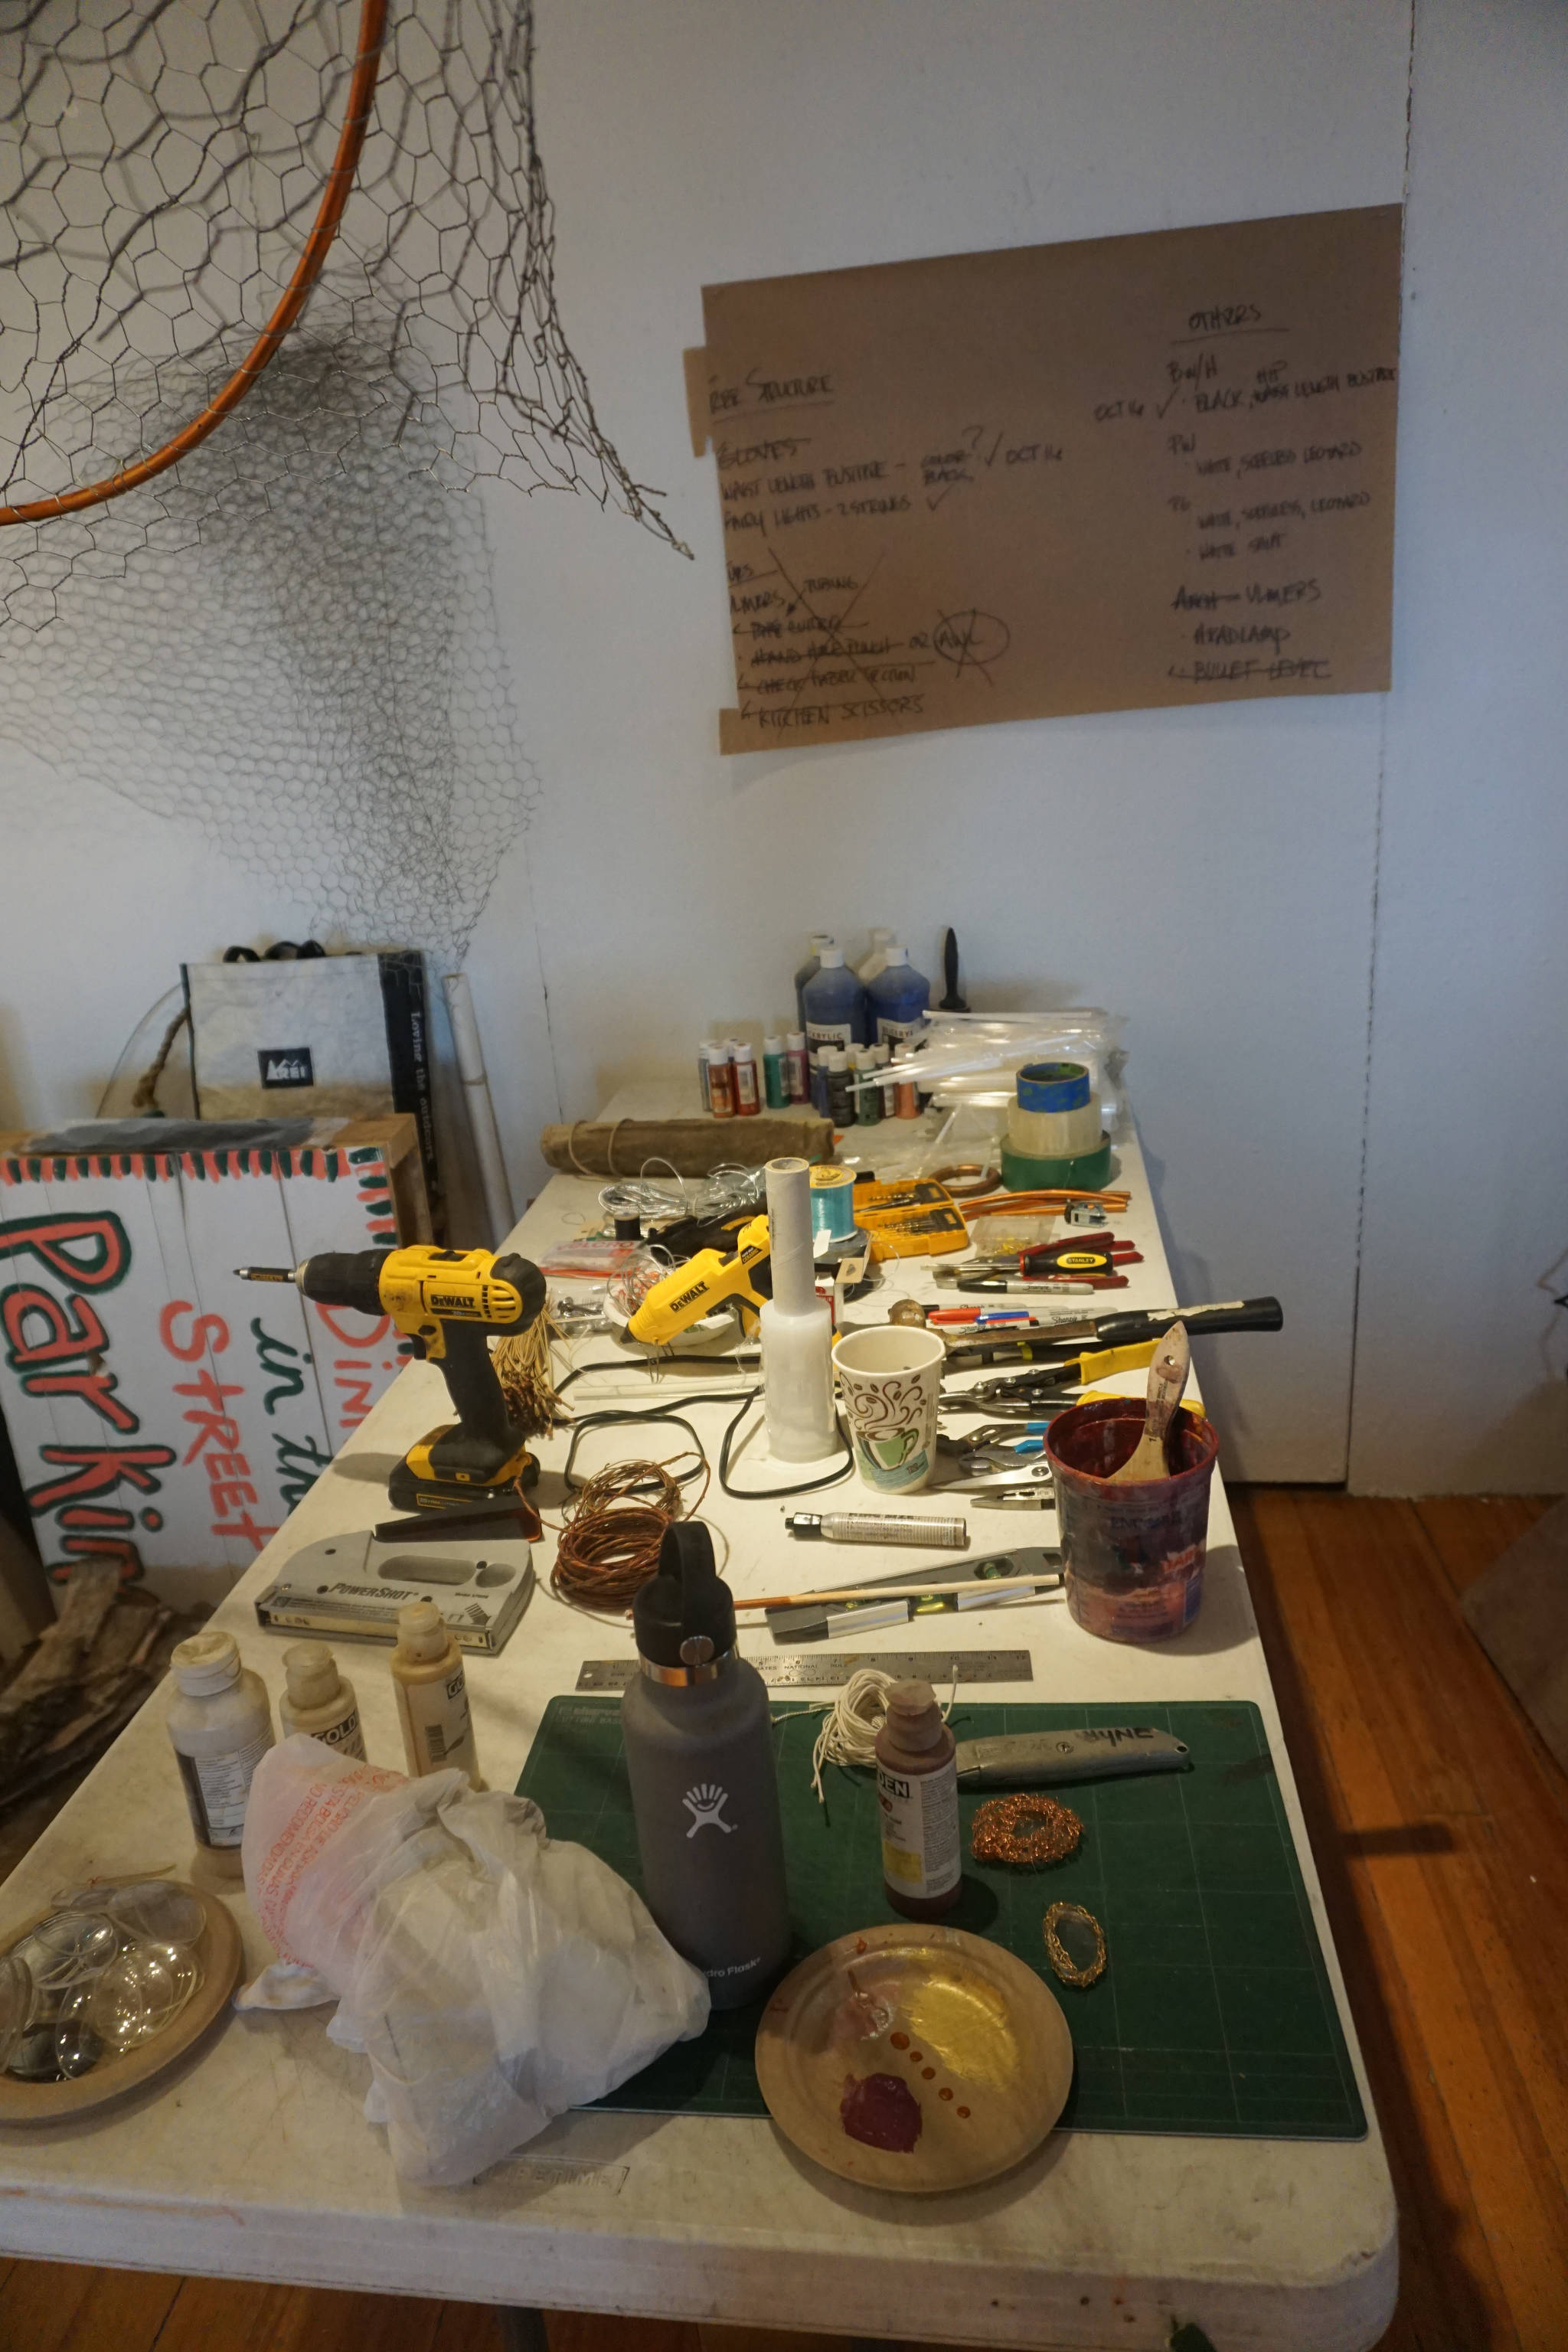 An array of tools at Sheila Wyne’s temporary studio in the Bunnell Street Arts Center in Homer, Alaska, shown here on Saturday, Oct. 14, 2017, shows that she’s not your typical fiber artist. (Photo by Michael Armstrong)